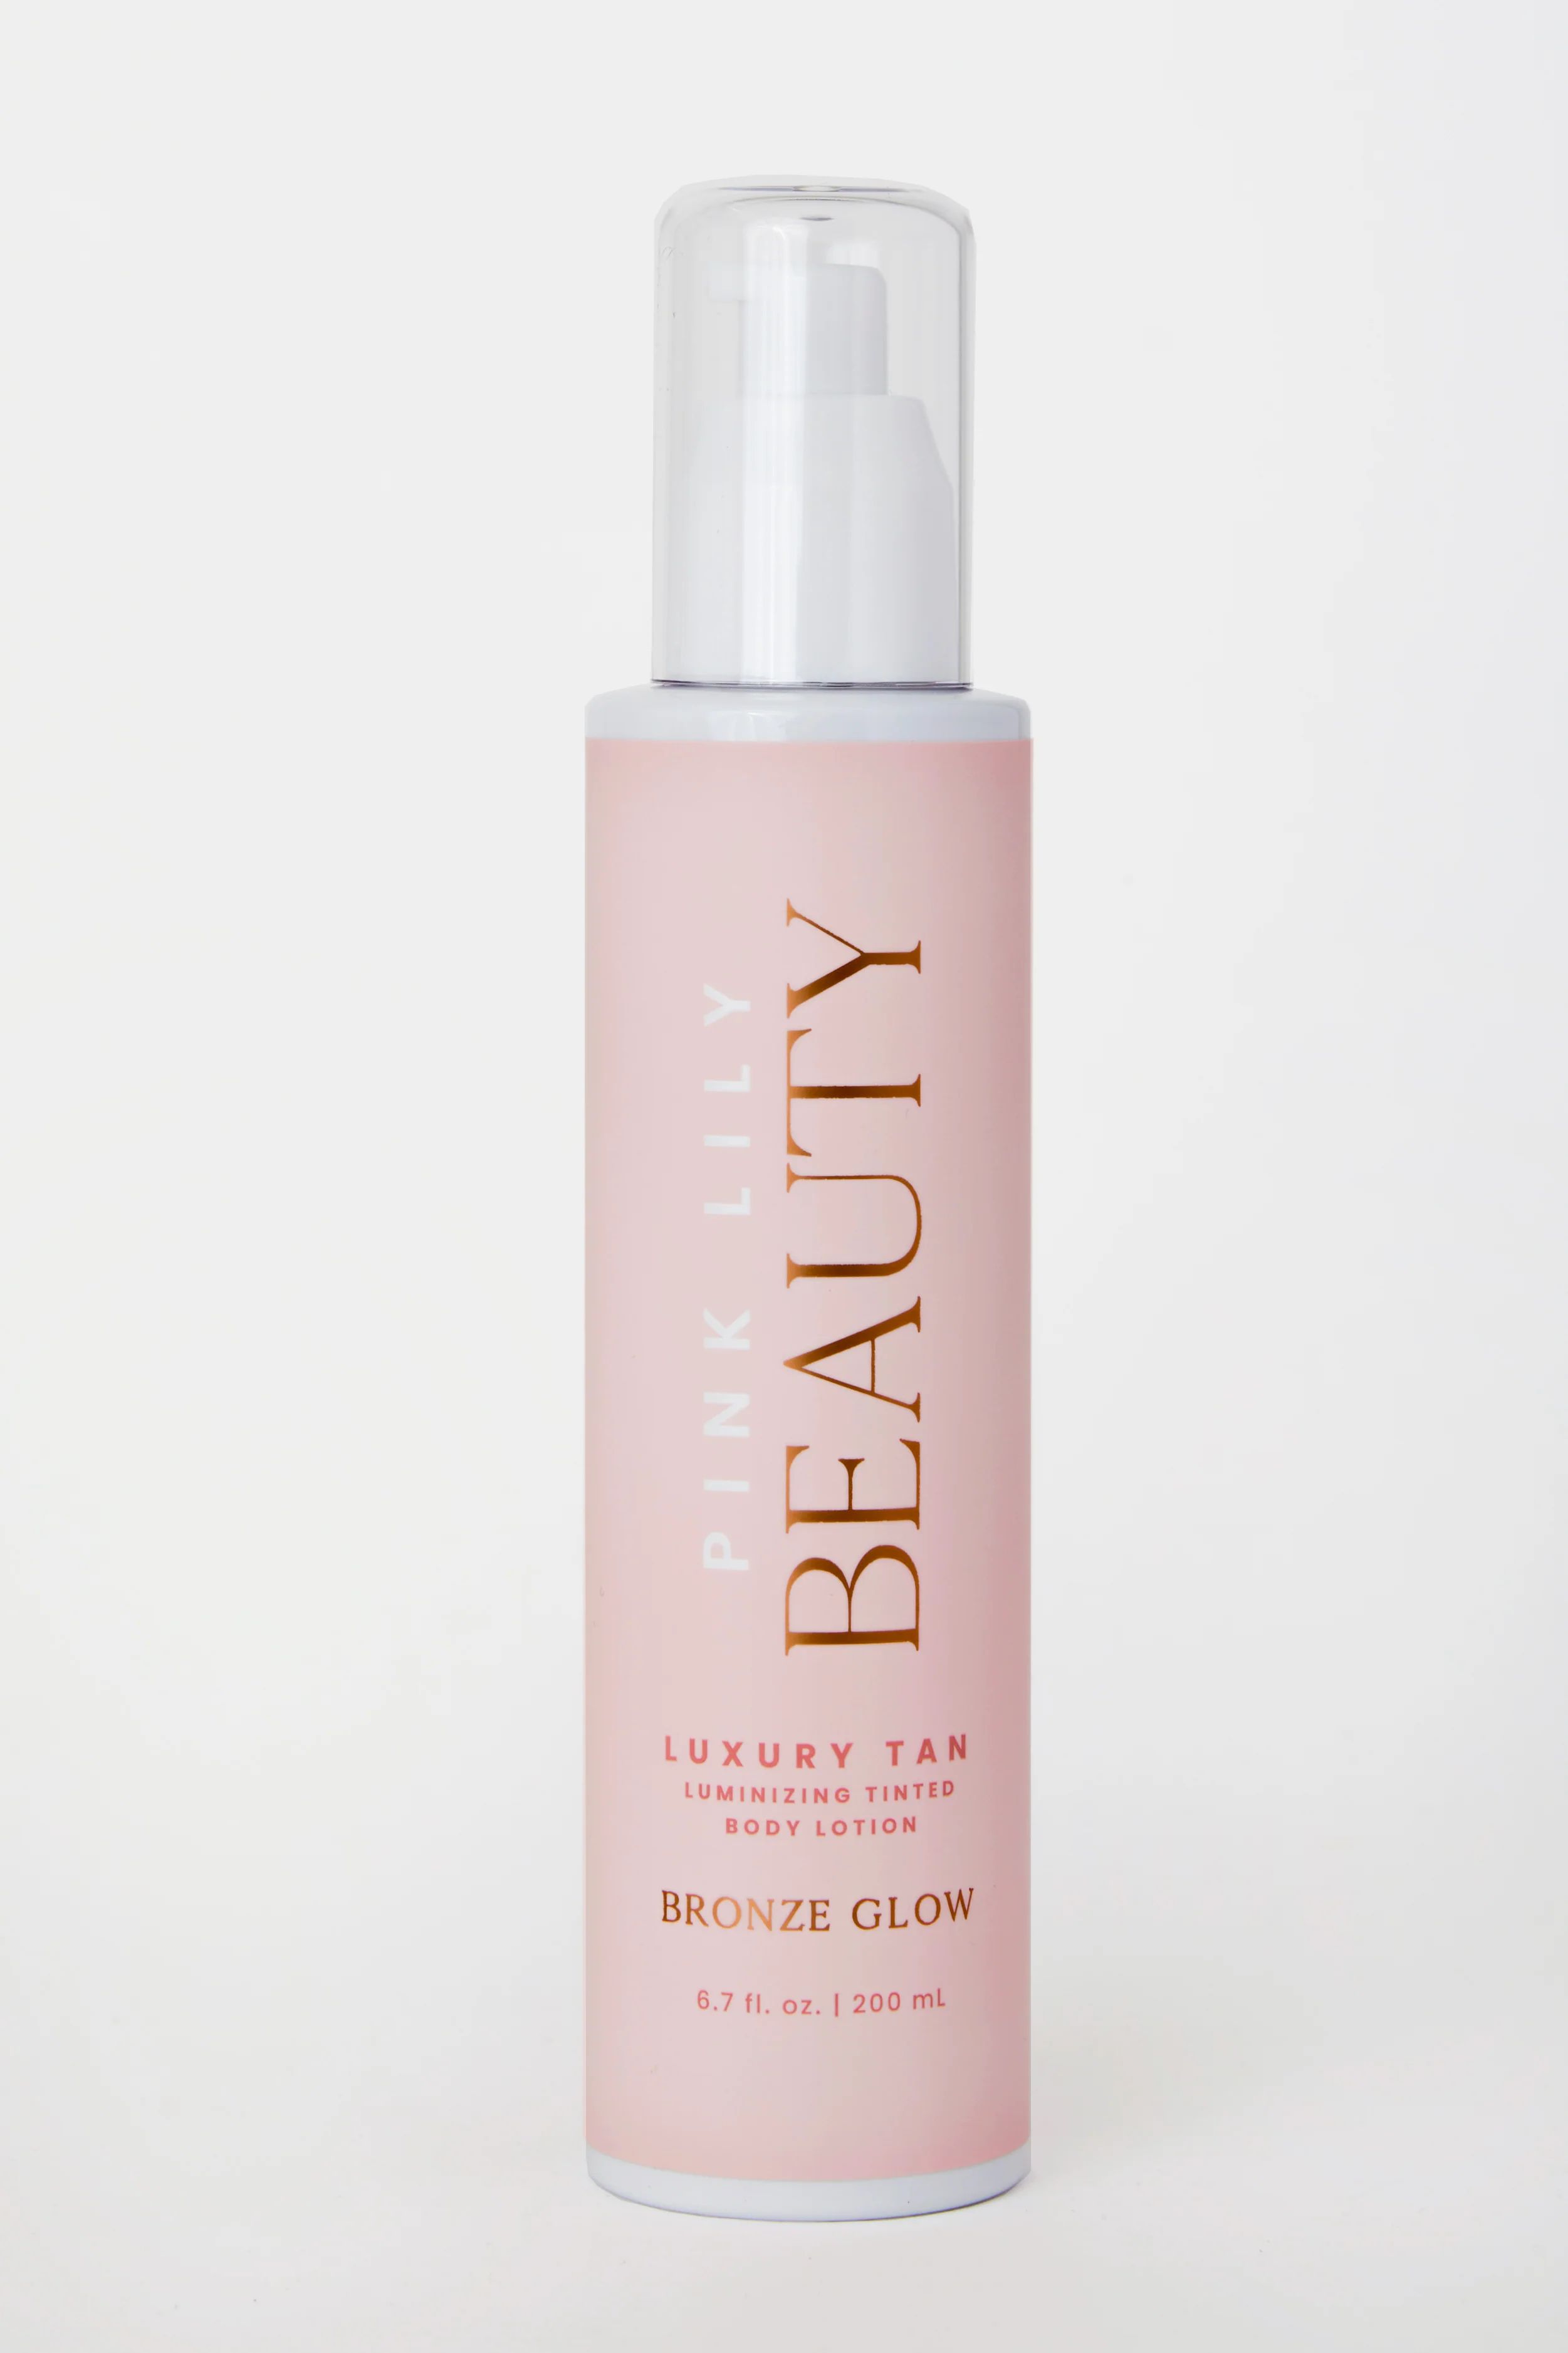 Pink Lily Luxury Tan Luminizing Body Lotion - Bronze Glow - Vegan and Cruelty Free | Pink Lily